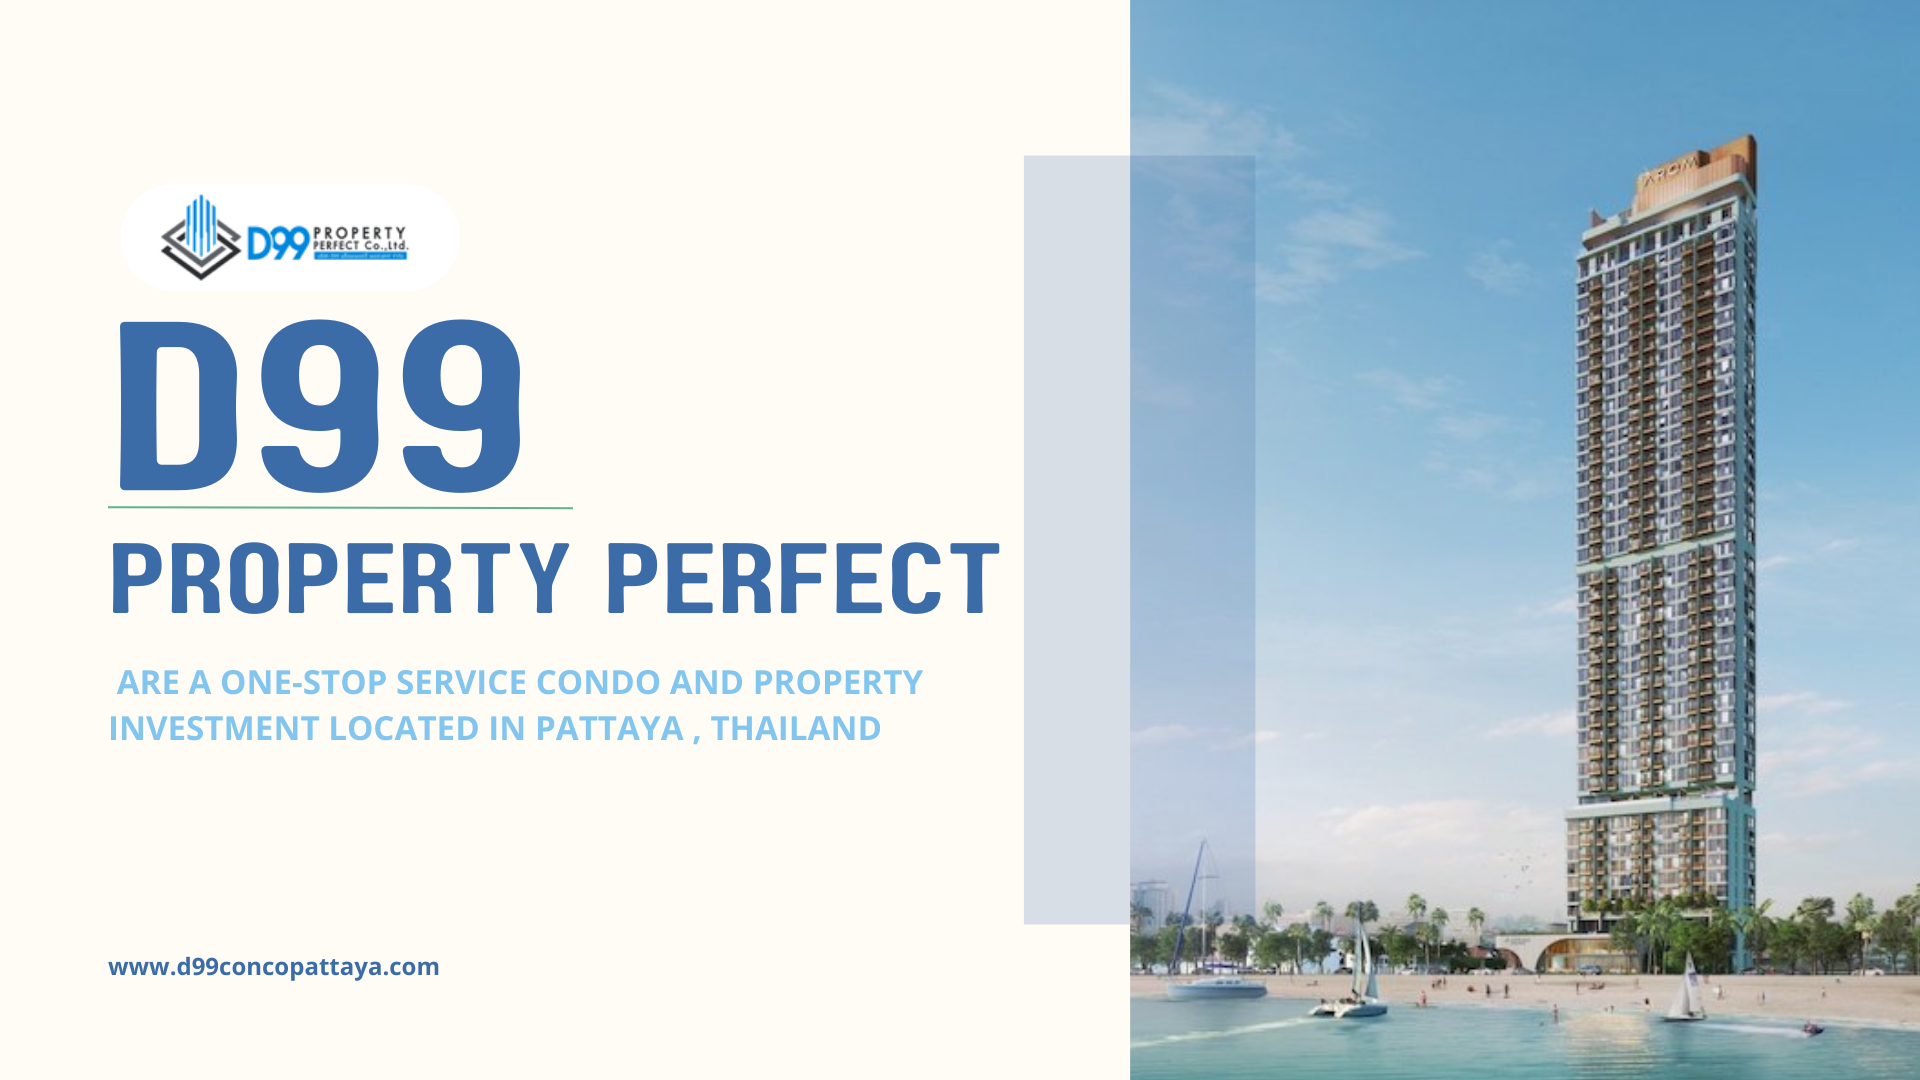 About D99 Property Perfect